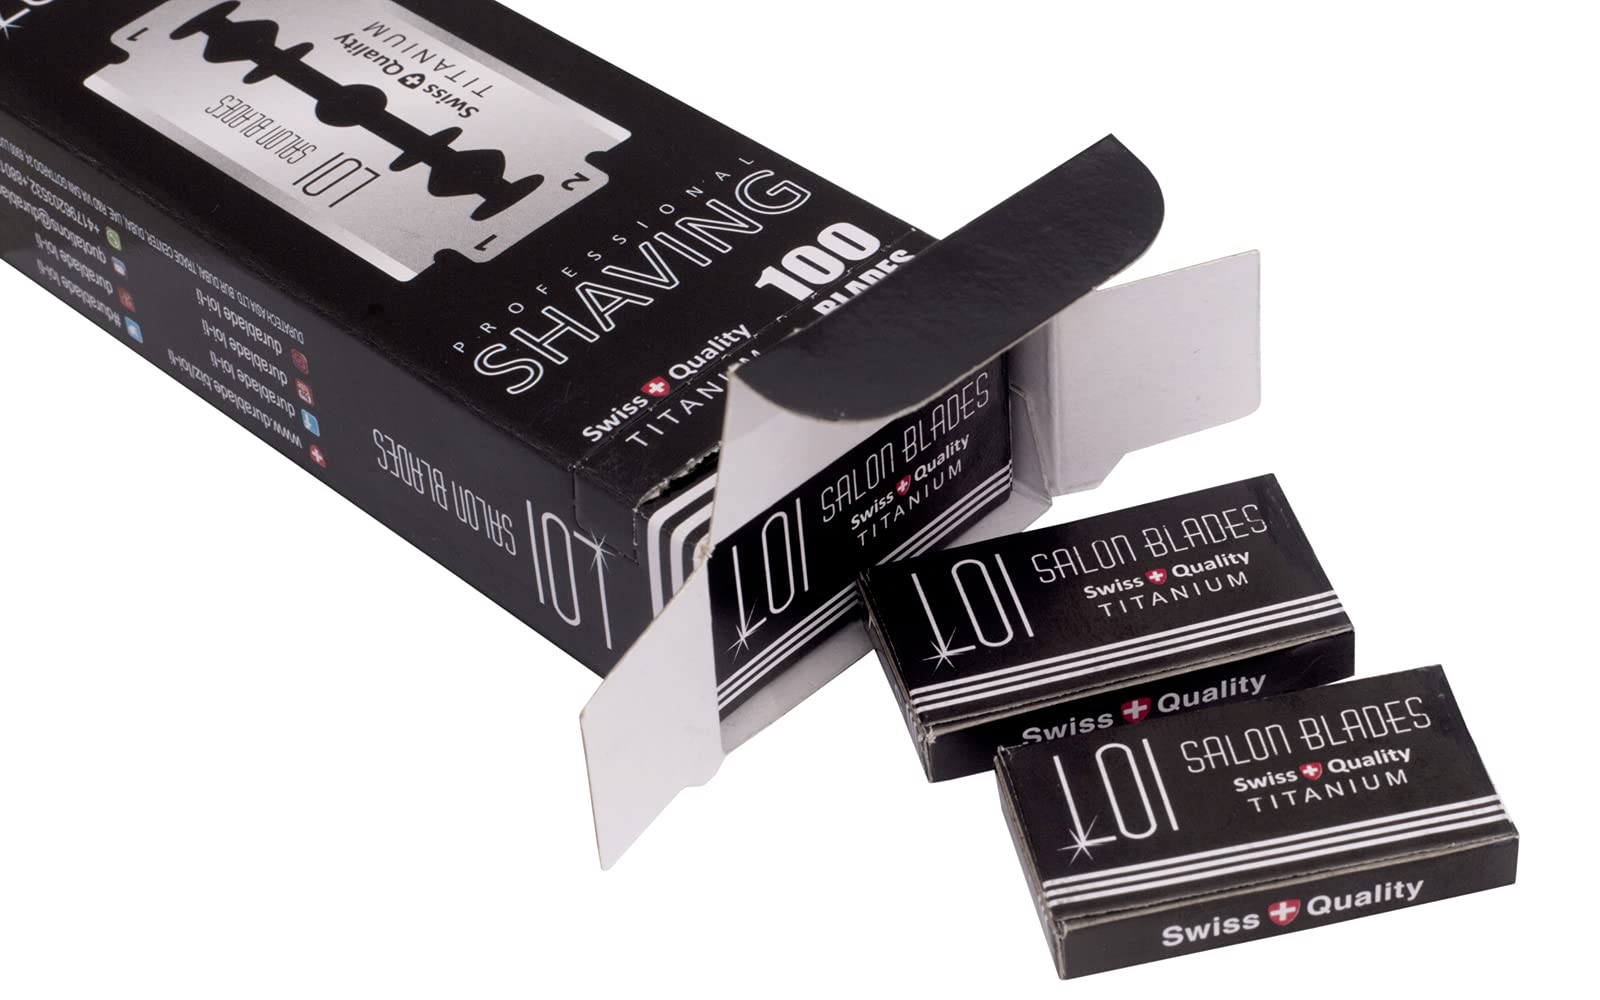 100 Loi Titanium Double Edge Razor Blades For Safety Razor - Men´s Safety Razor Blades For Shaving For Men For A Smooth And Clean Shave (1 Year Supply)